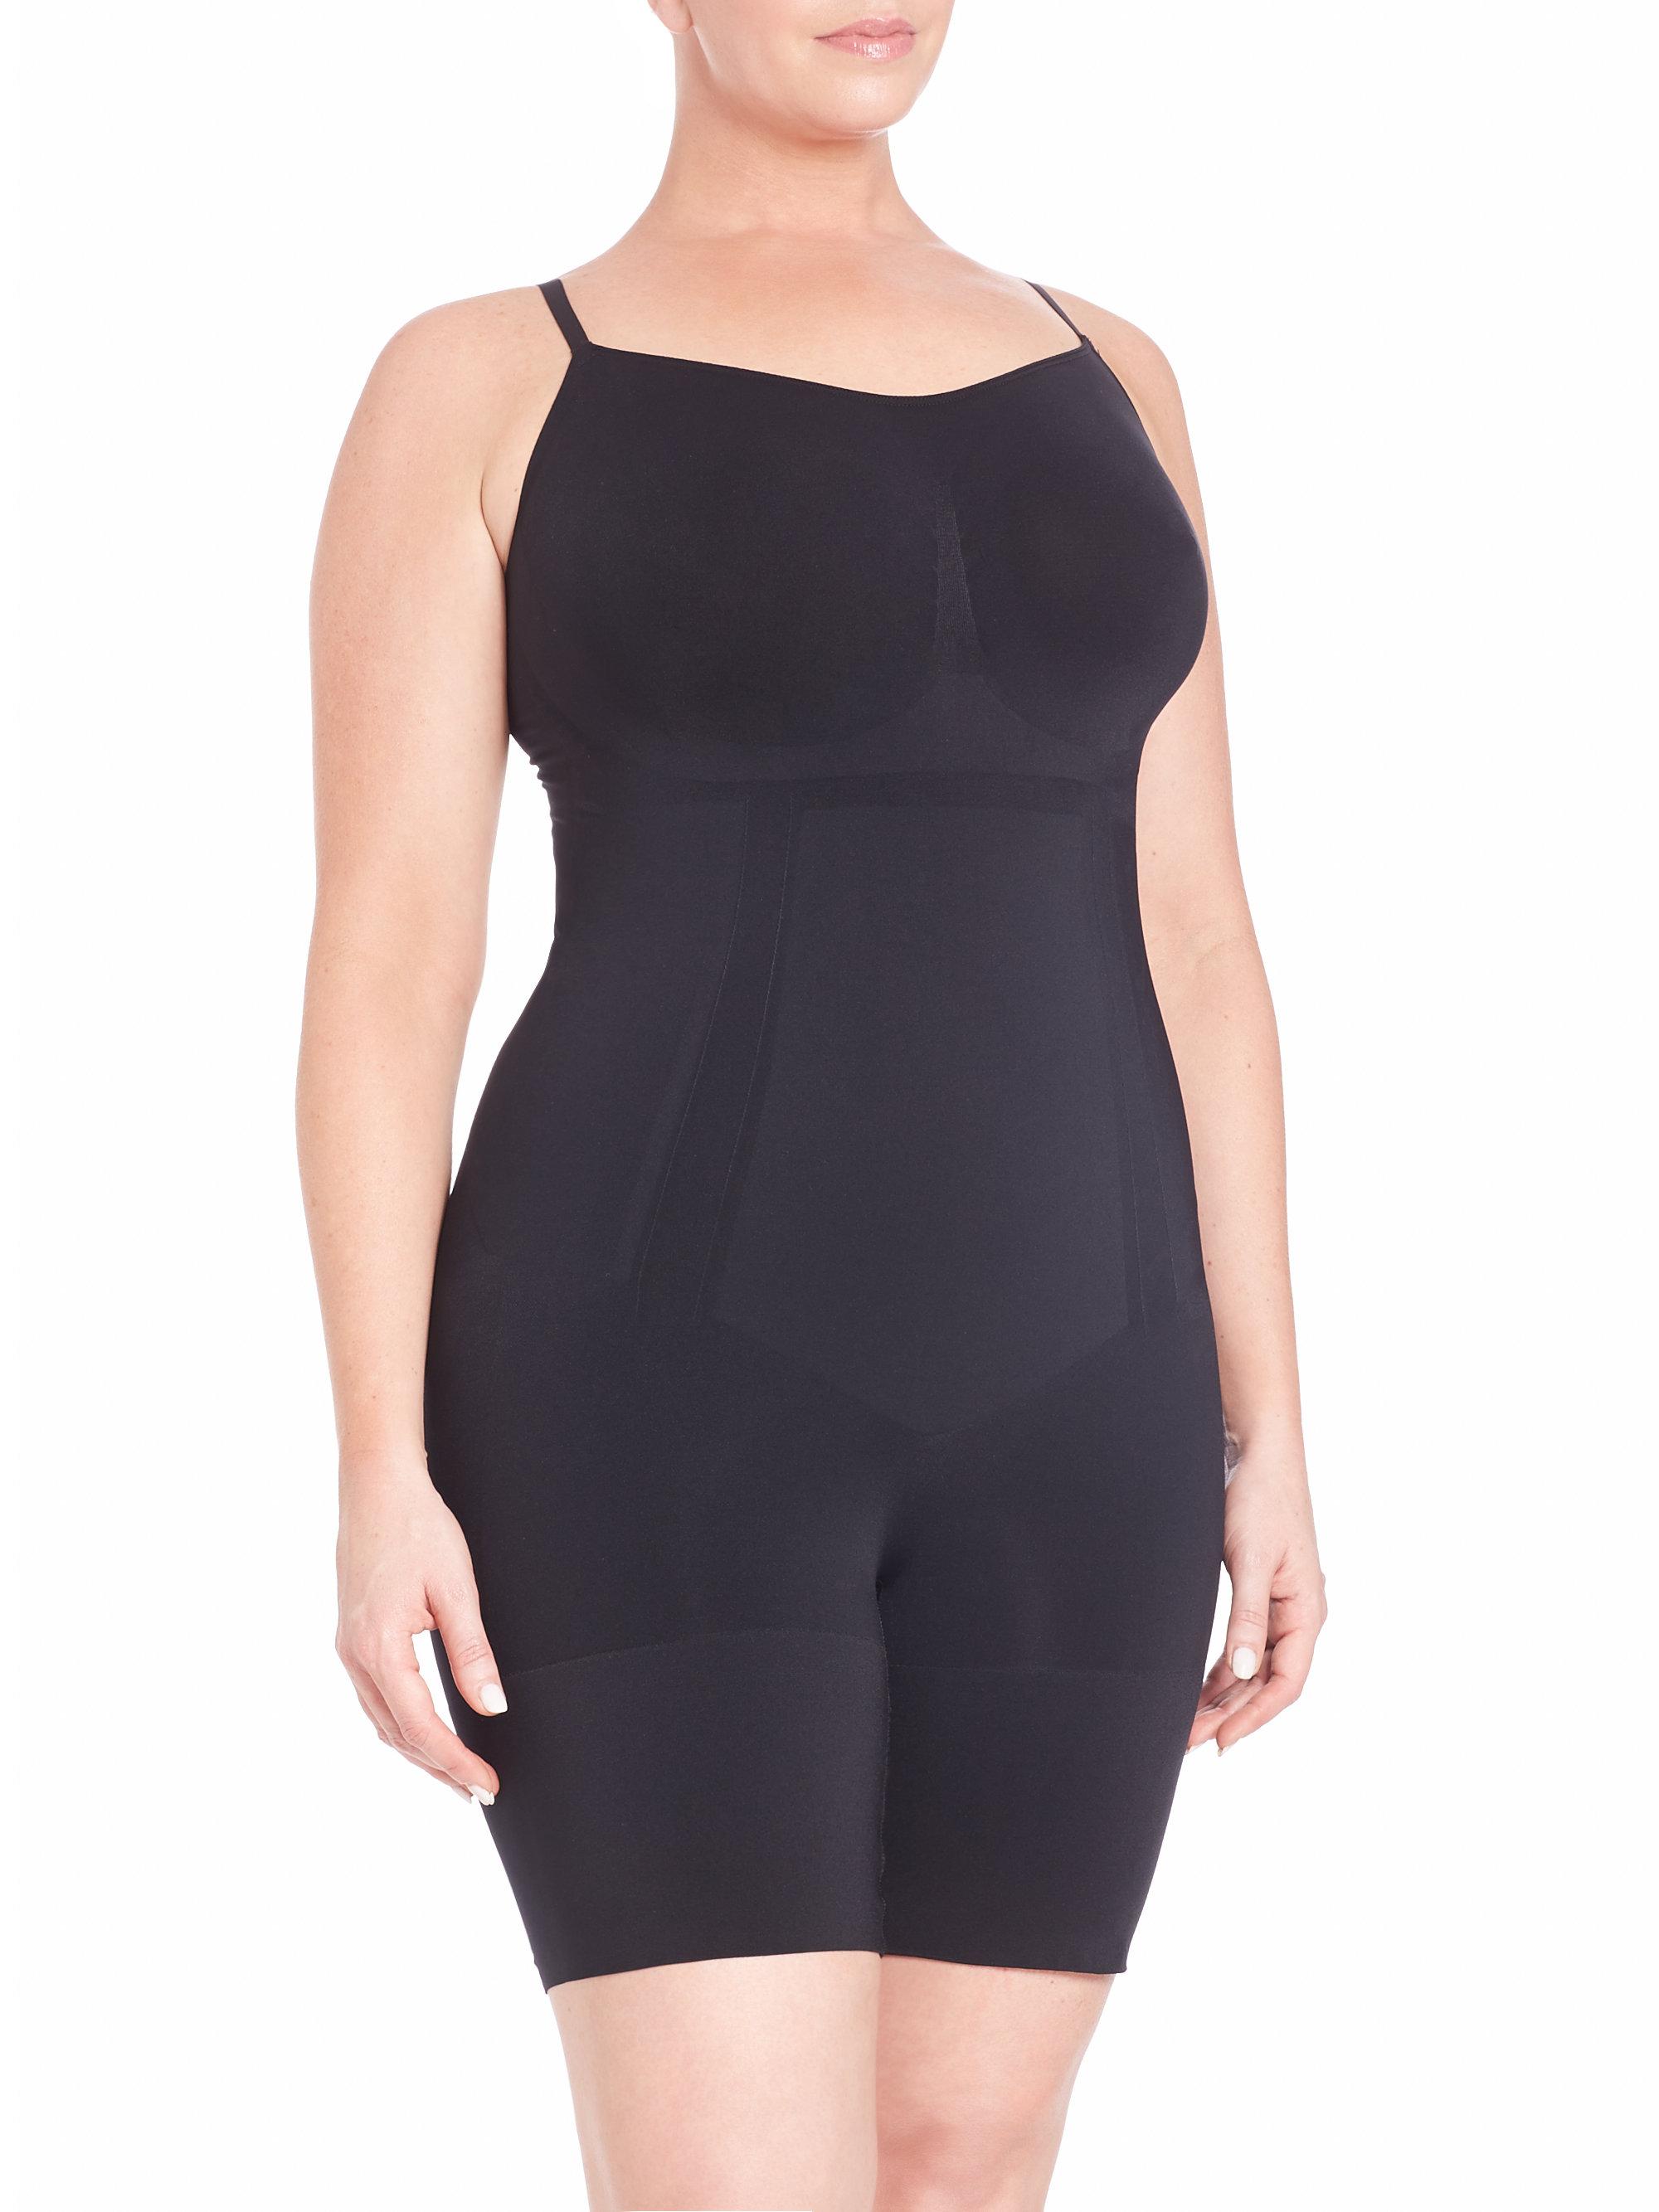 Lyst - Spanx Oncore Mid-thigh Plus-size Bodysuit in Black